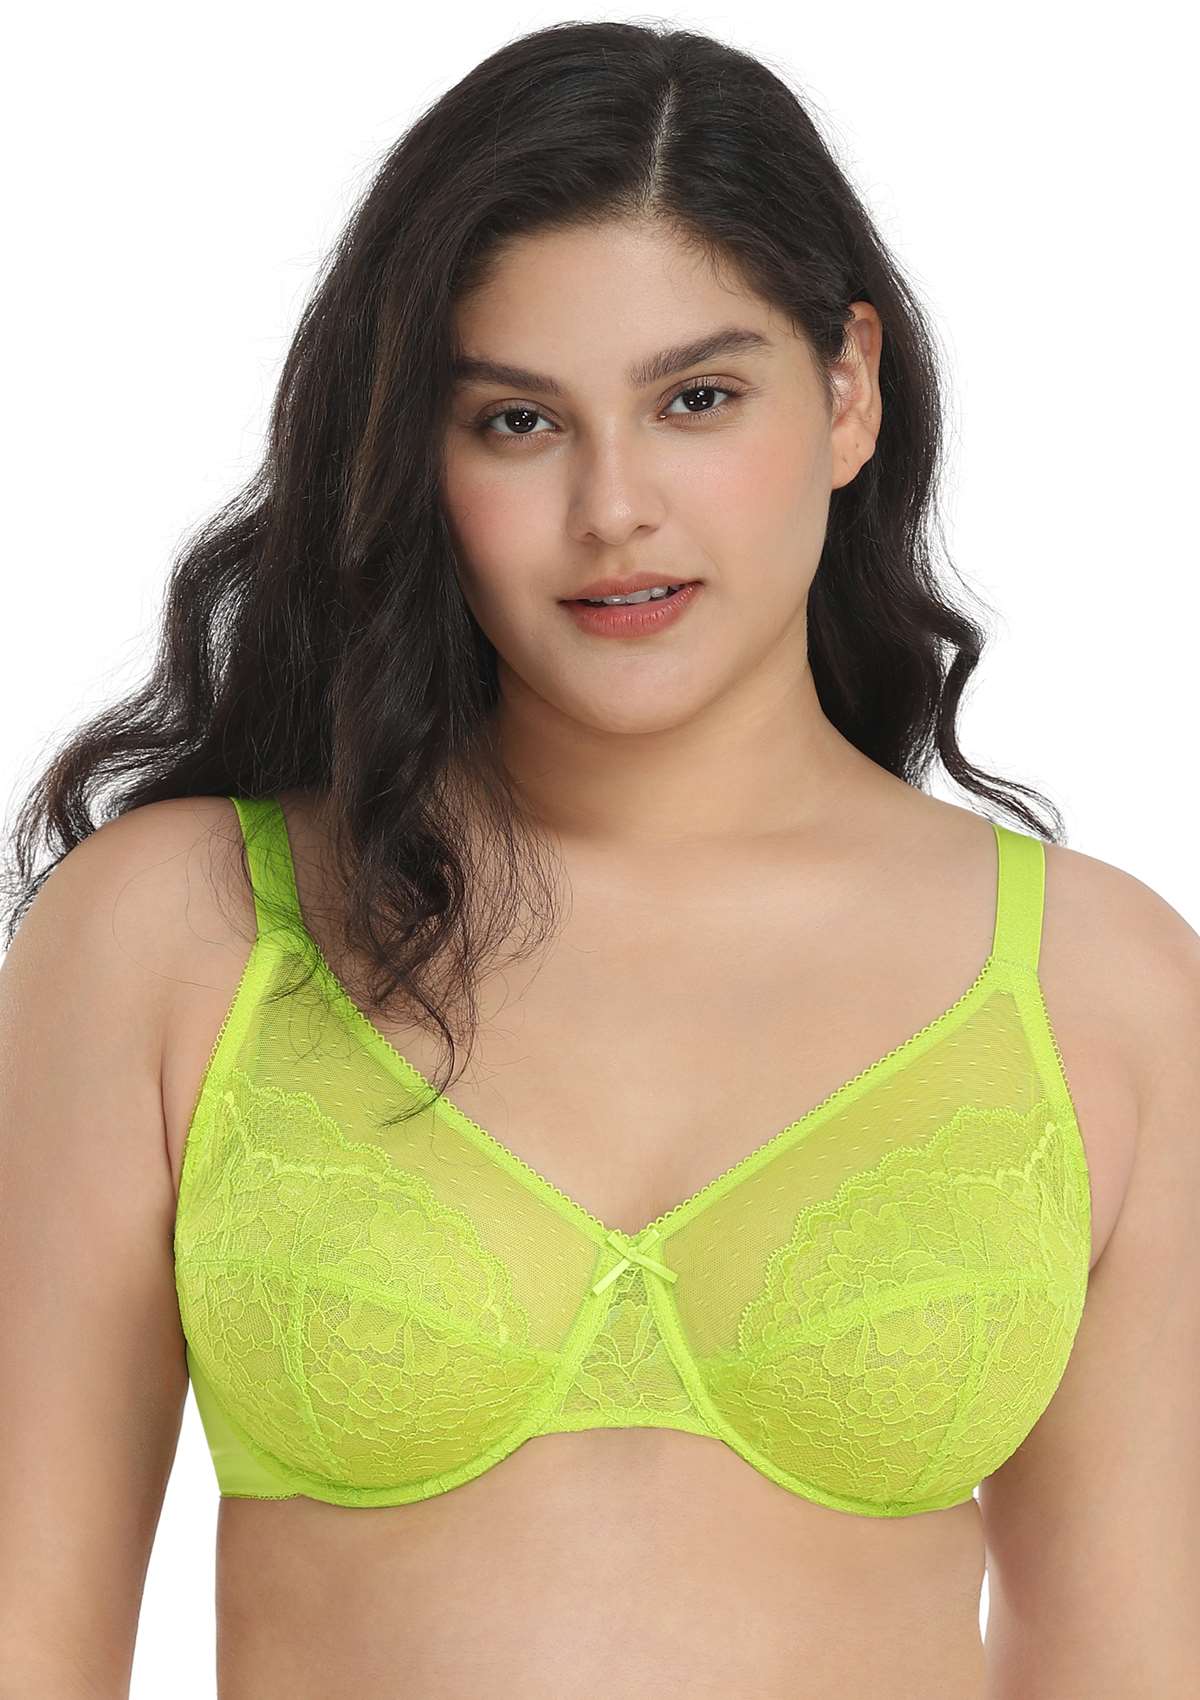 HSIA Enchante Full Cup Minimizing Bra: Supportive Unlined Lace Bra - Lime Green / 38 / I